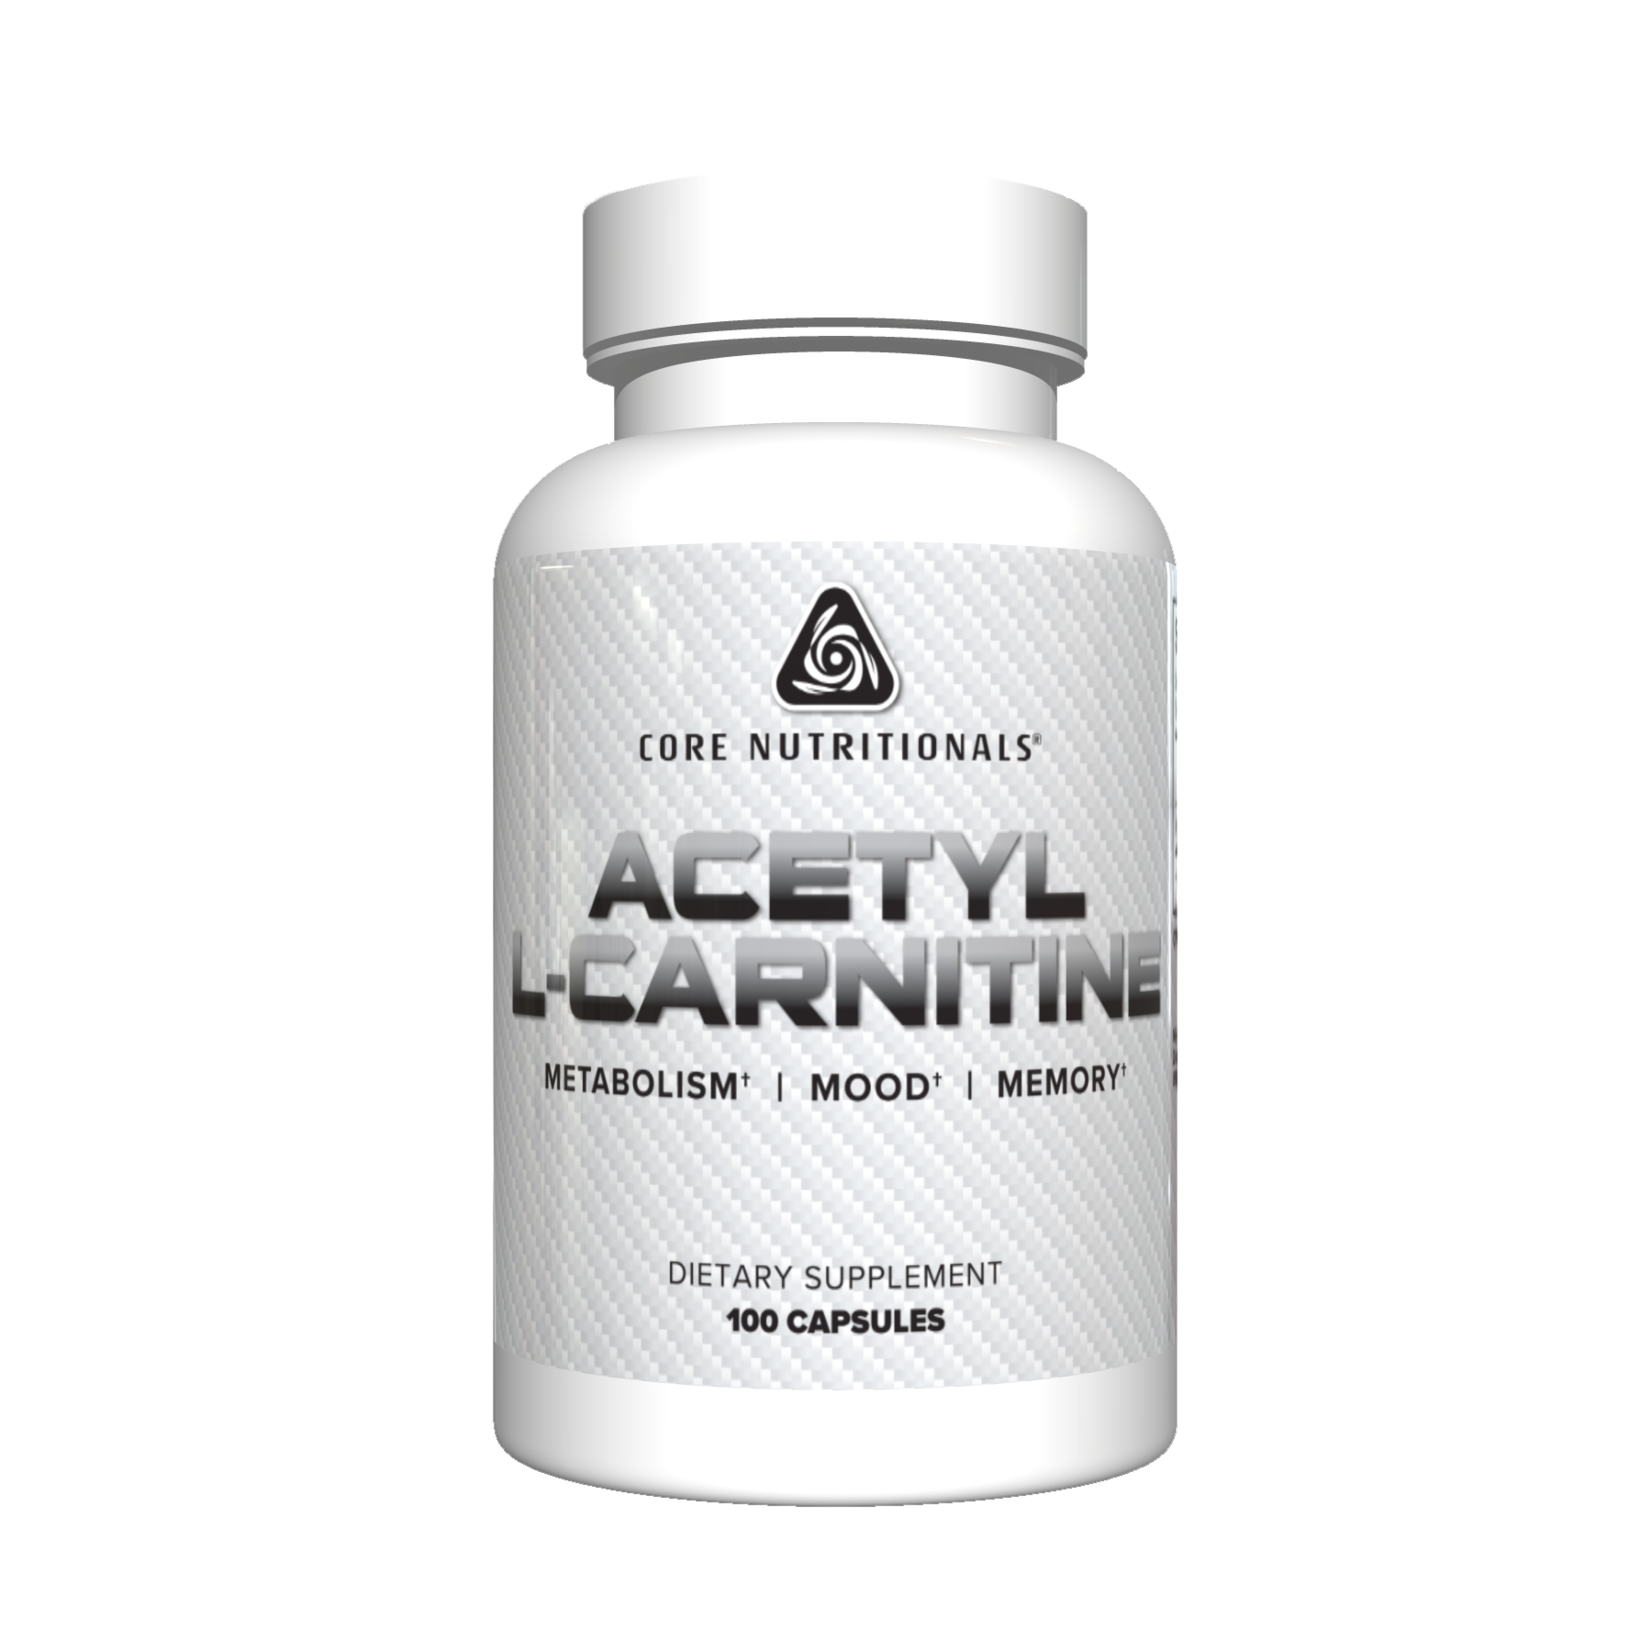 Core Nutritionals Core Commodities Acetyl L-Carnitine